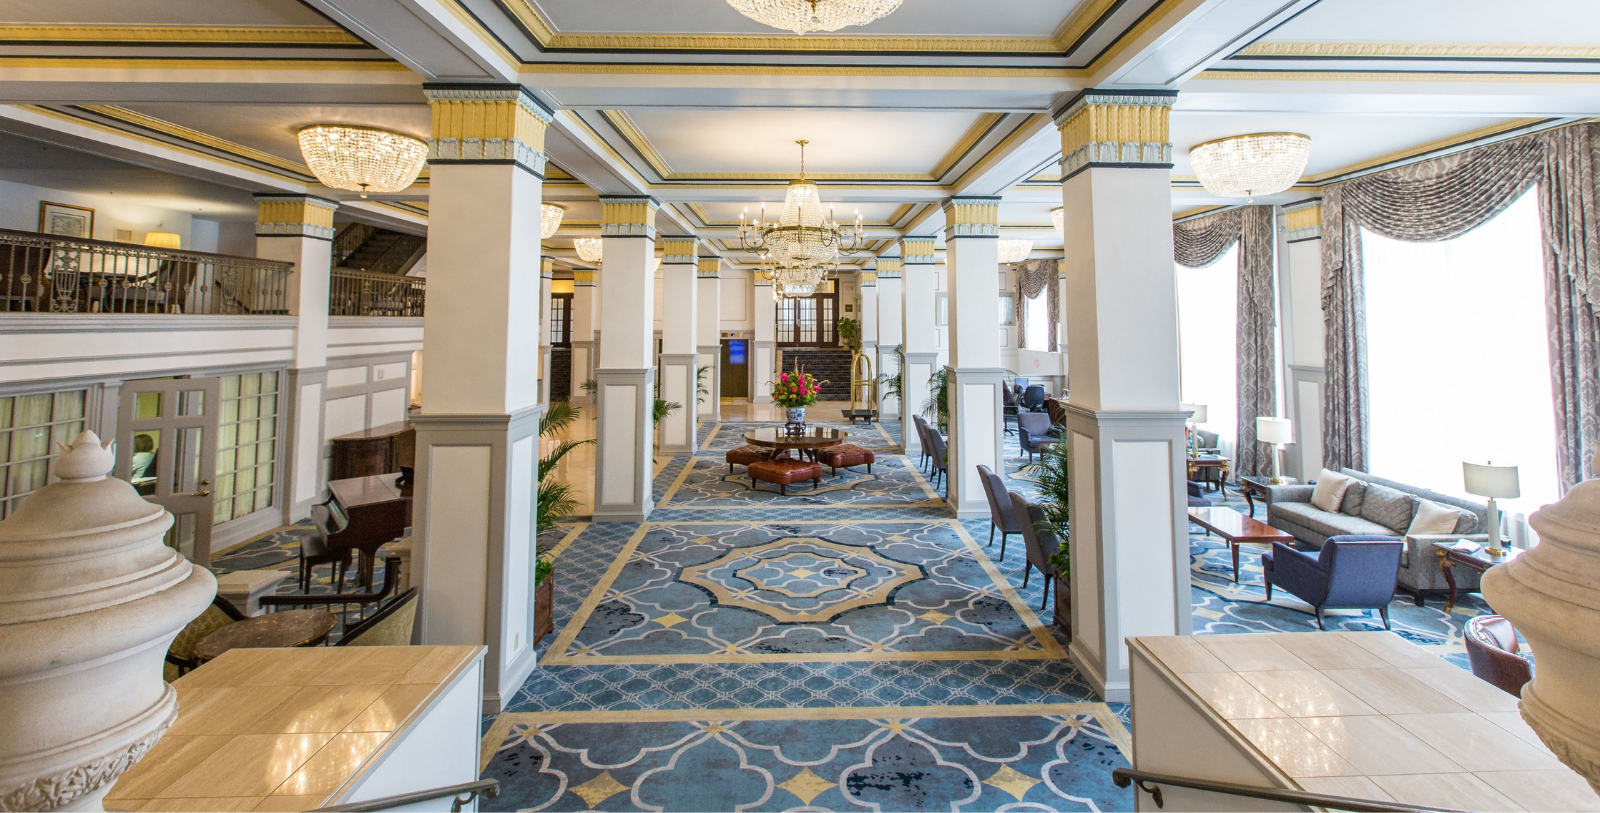 Image of lobby of Francis Marion Hotel, a member of Historic Hotels of American since 1999, located in Charleston, South Carolina